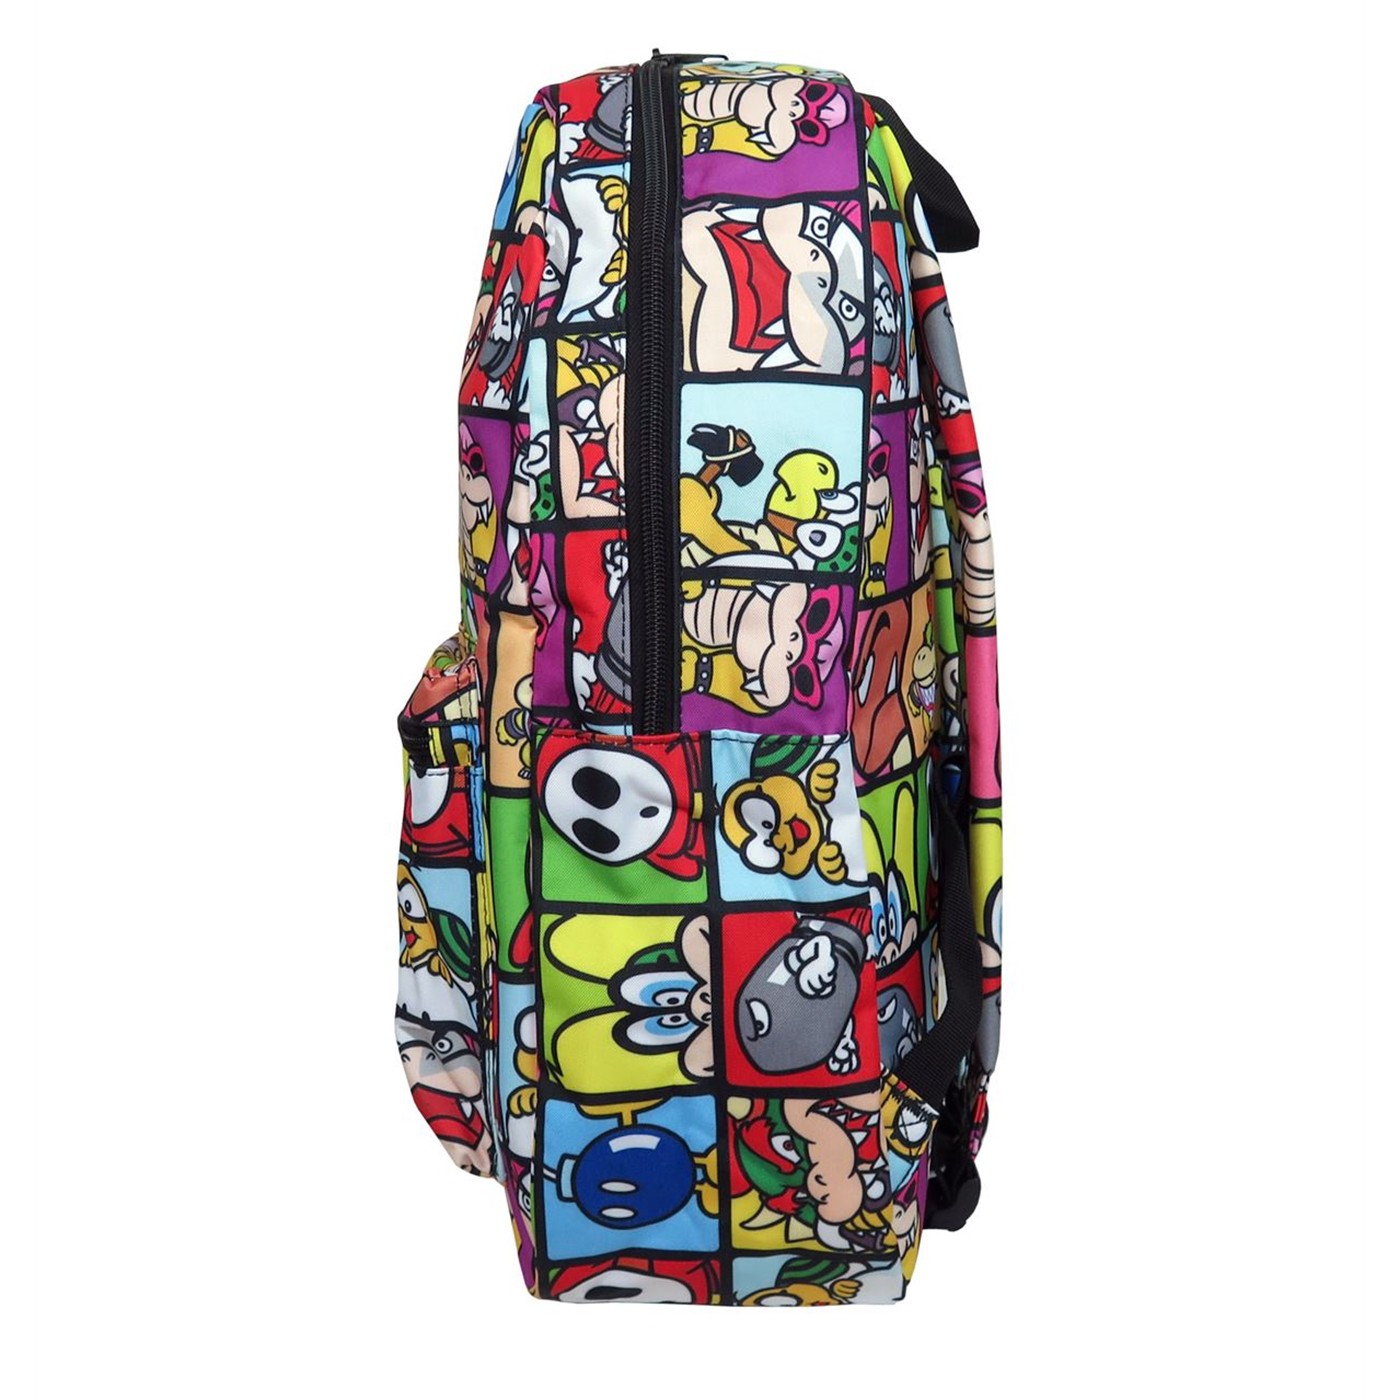 Super Mario Bros. Villains Sublimated Backpack